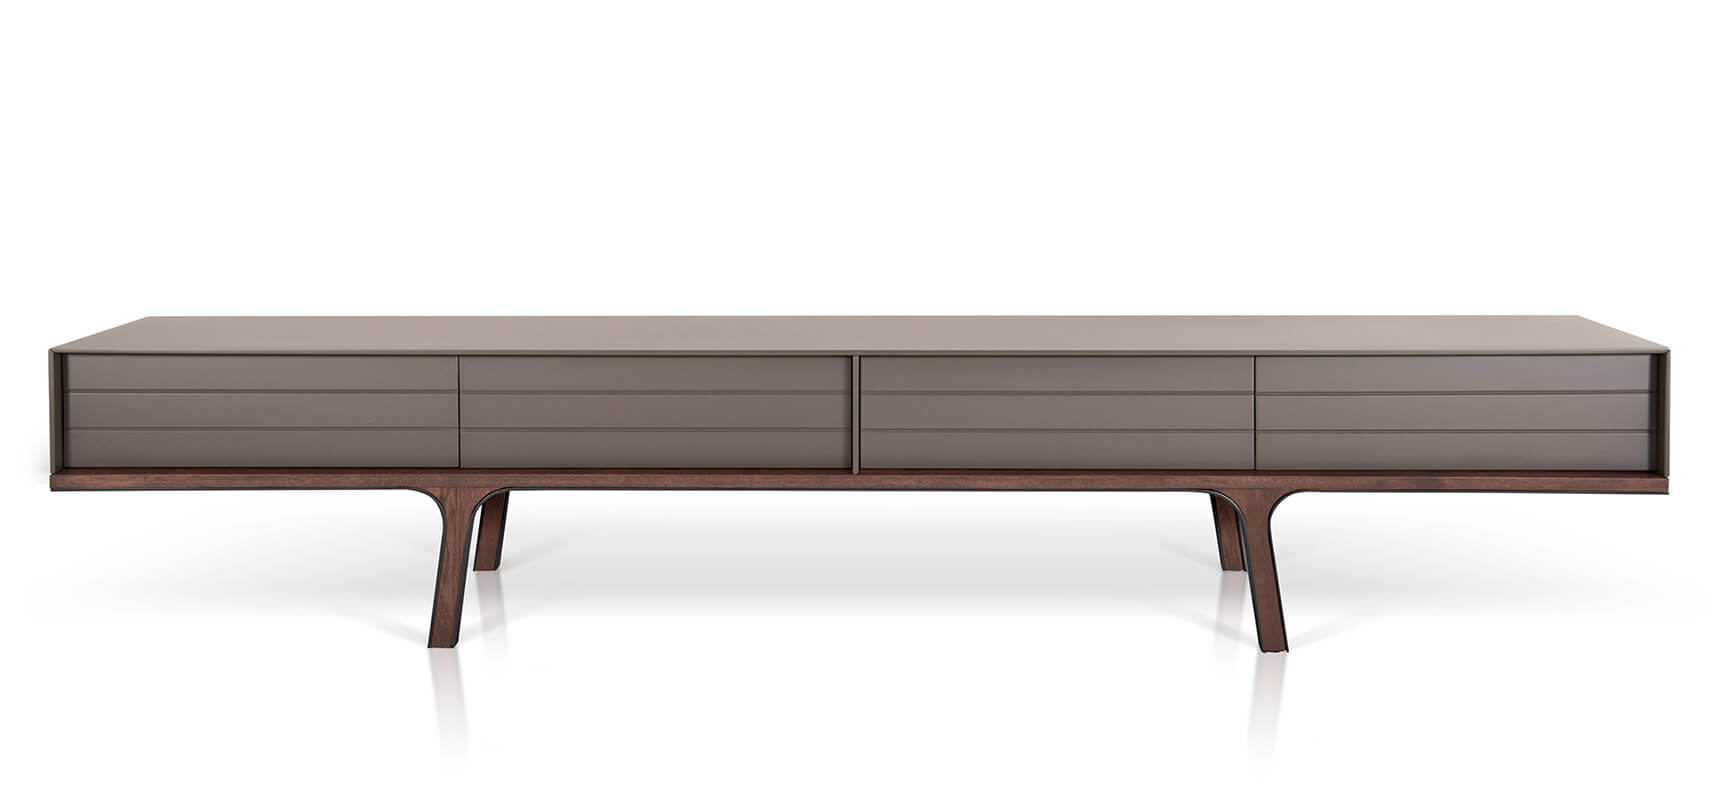 Mobius 019 TV unit in lacquer and walnut wood. al2